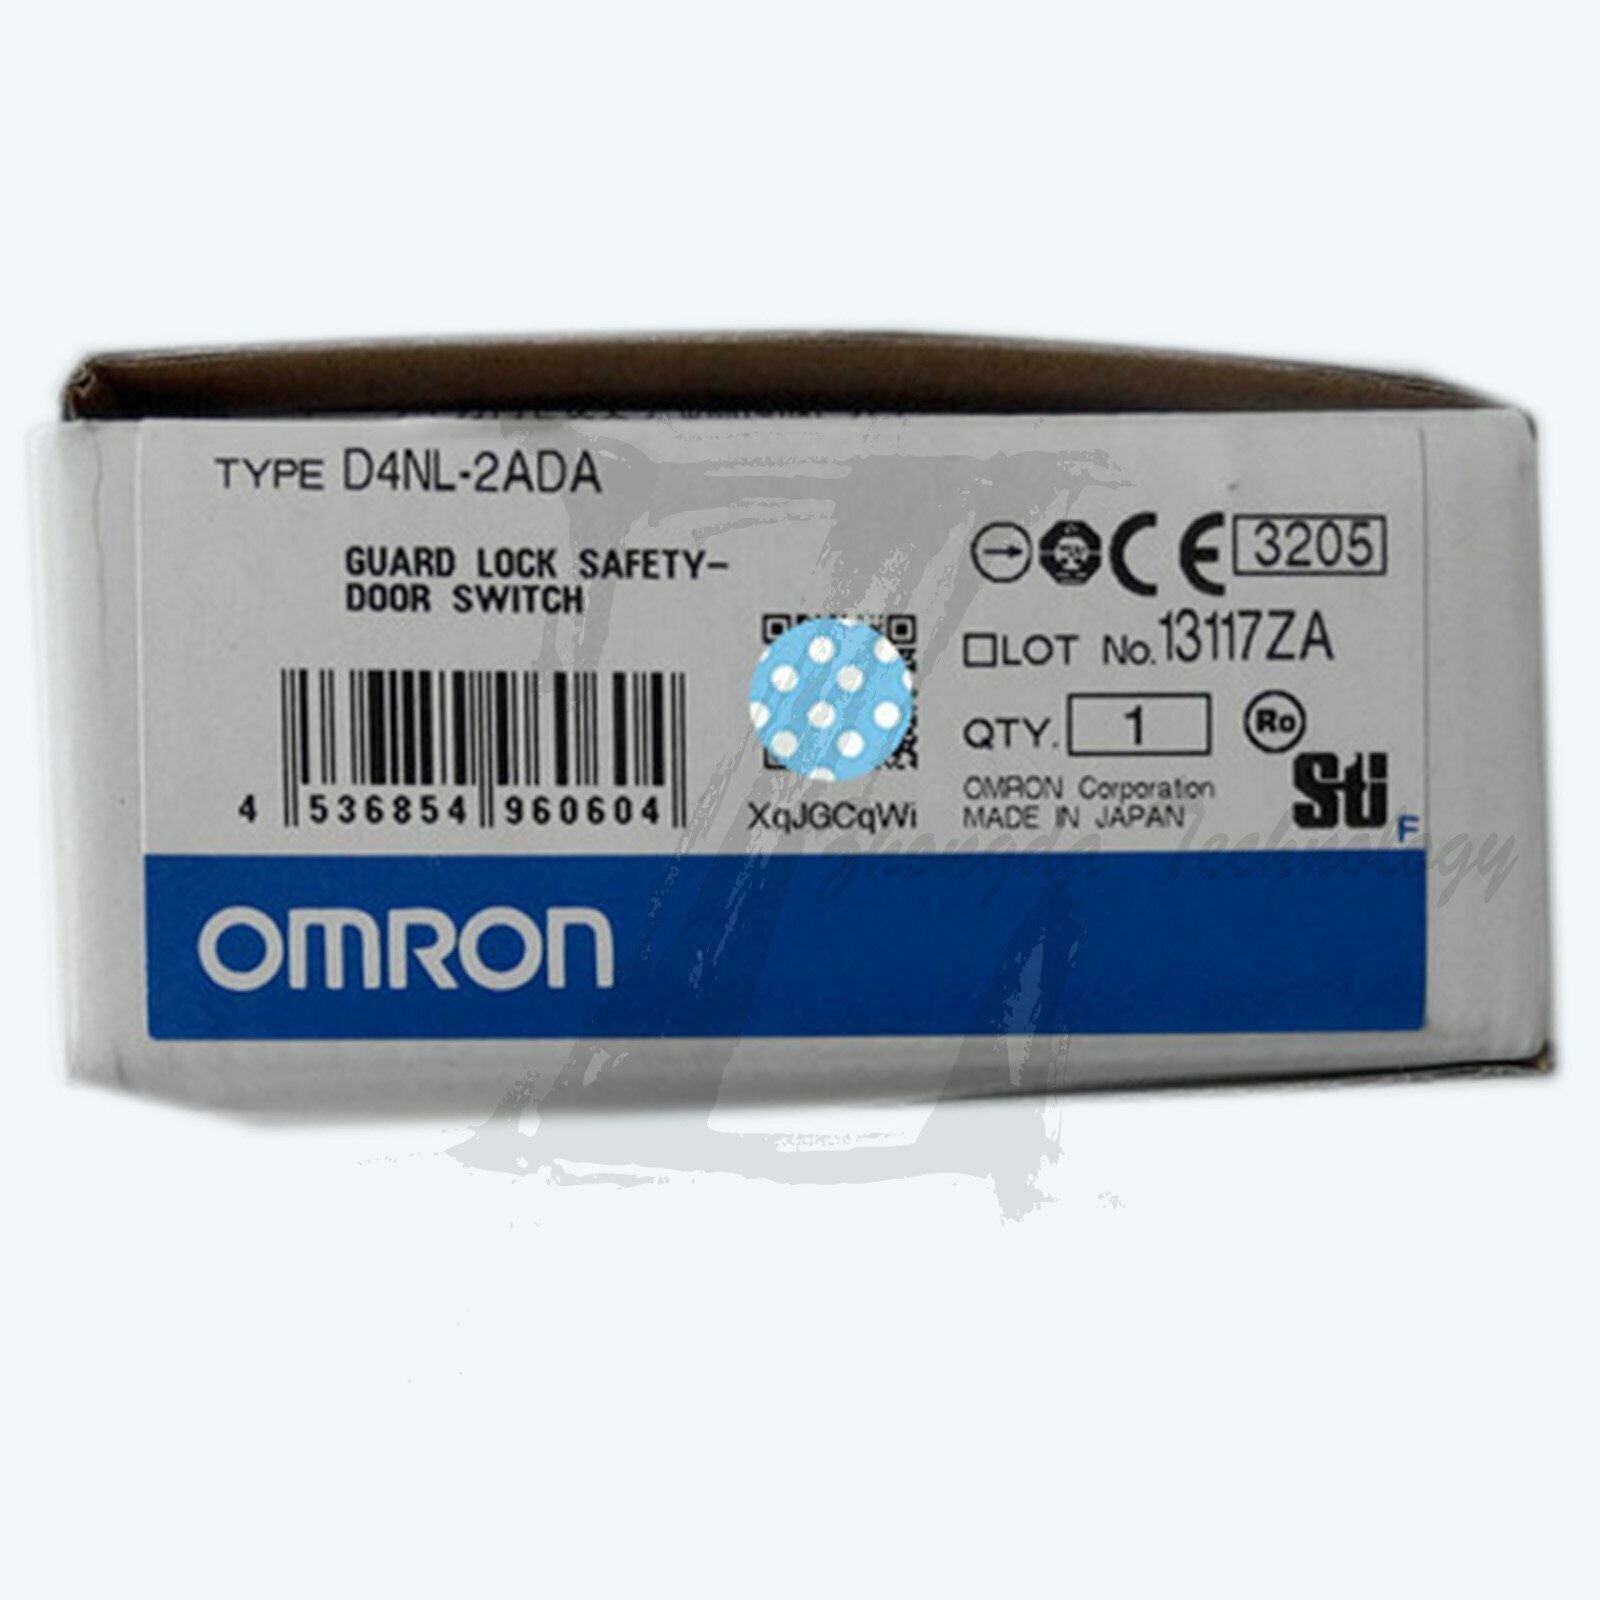 1pc new Omron safety door switch D4NL-2ADA-B one year warranty KOEED 101-200, 80%, import_2020_10_10_031751, Omron, Other